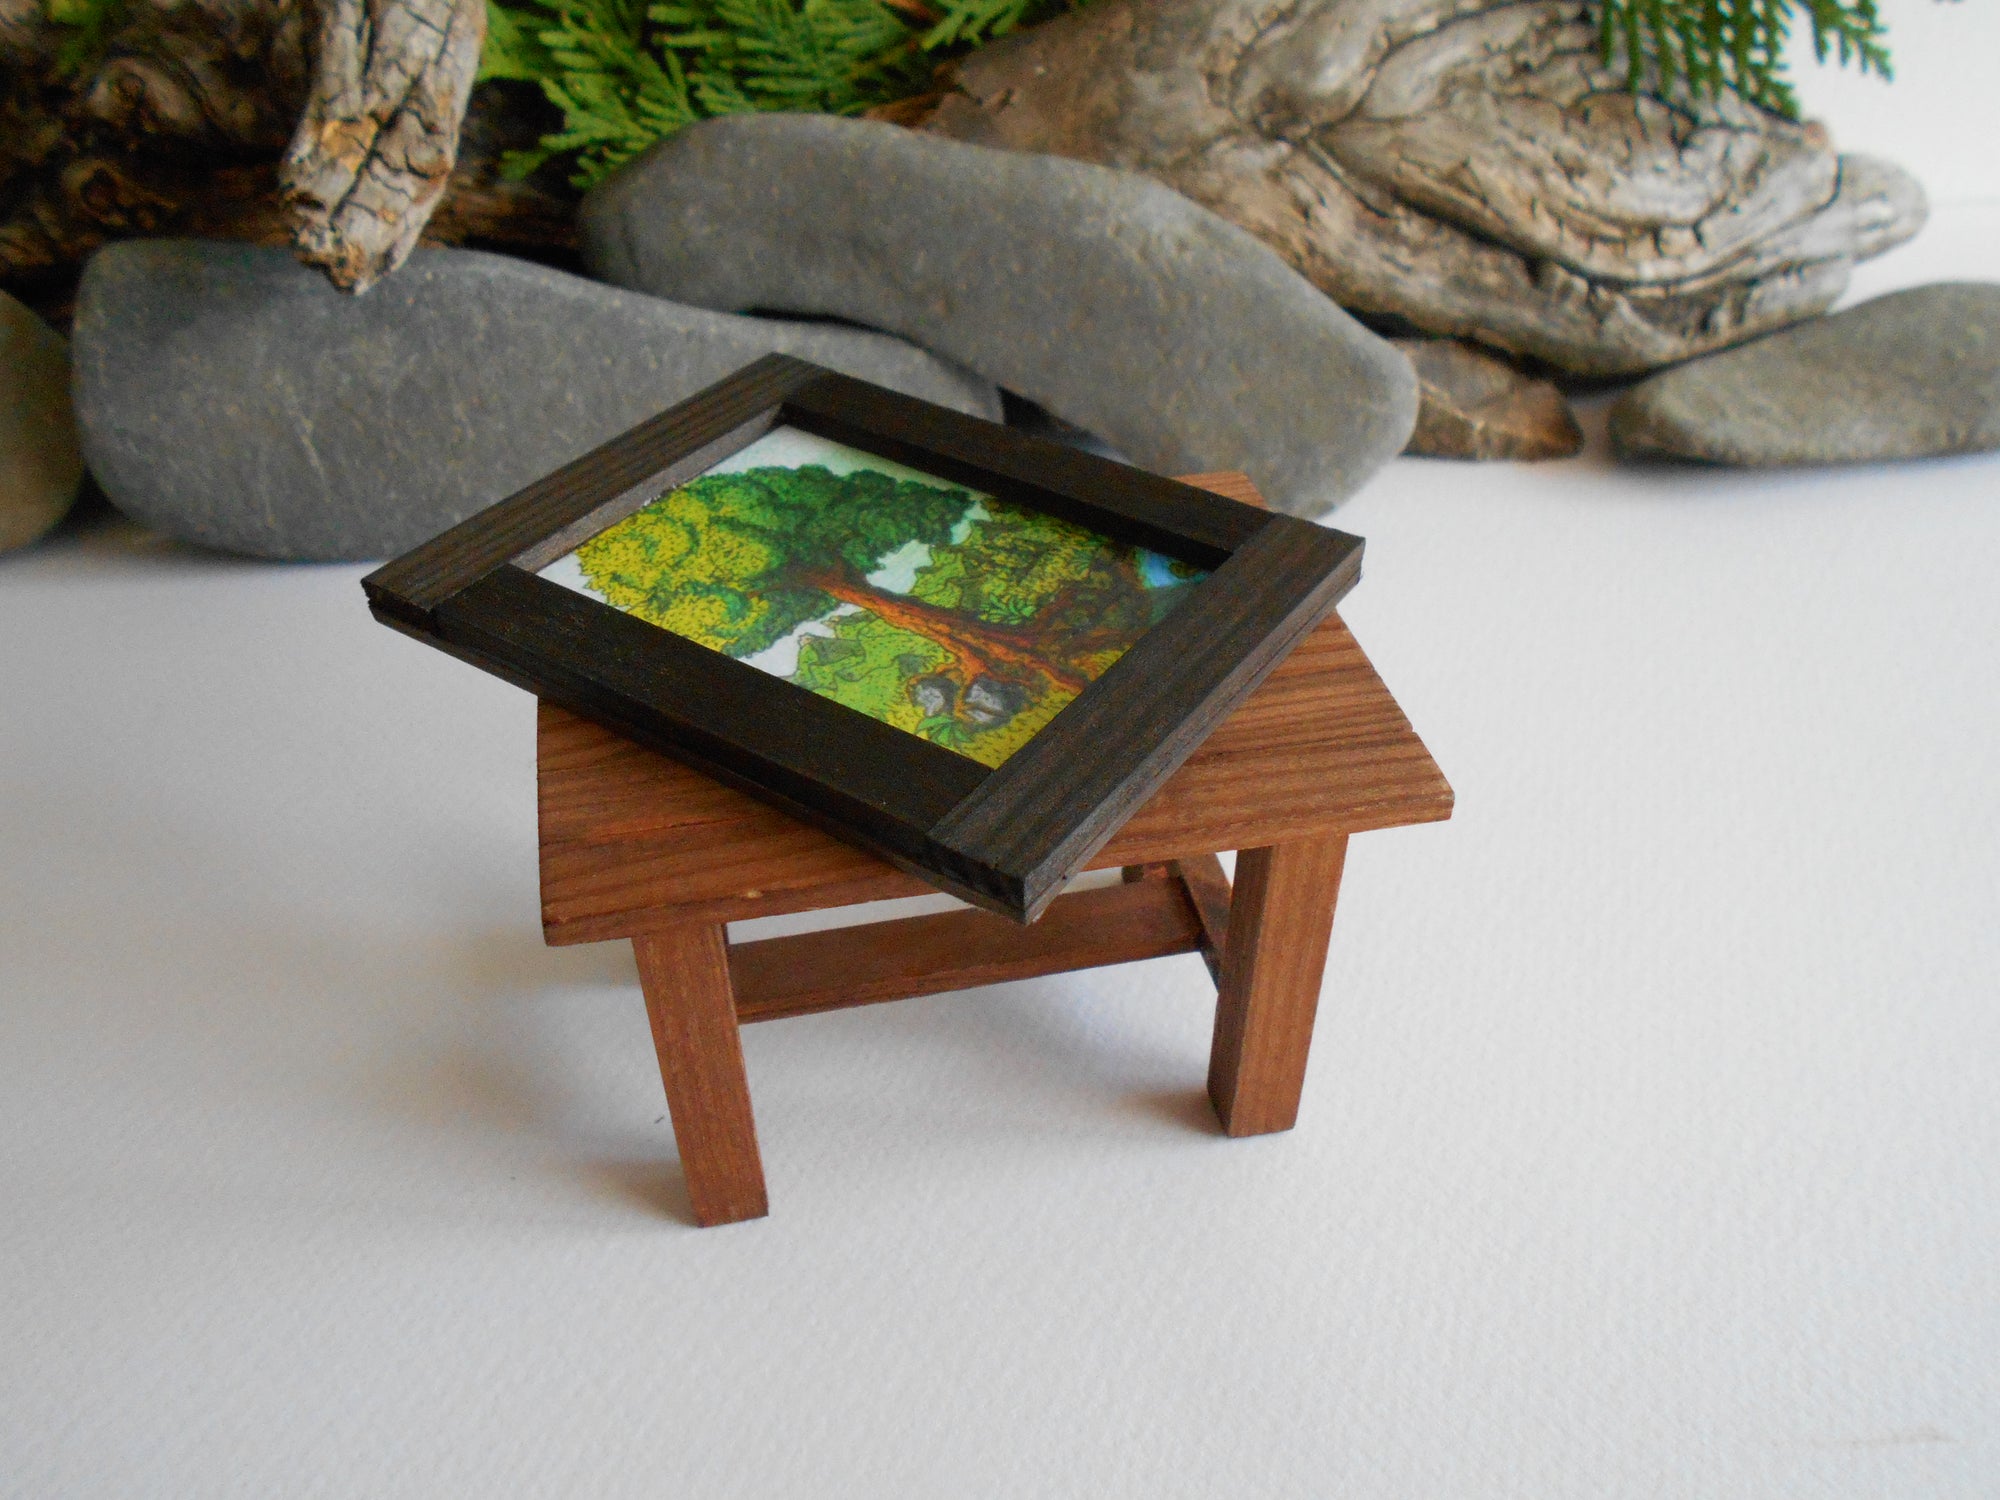 Handmade wooden framed miniature artwork painting for dollhouse decoration with an art of an oak tree and a mountain landscape by ExiArts eco-friendly company from Bulgaria.